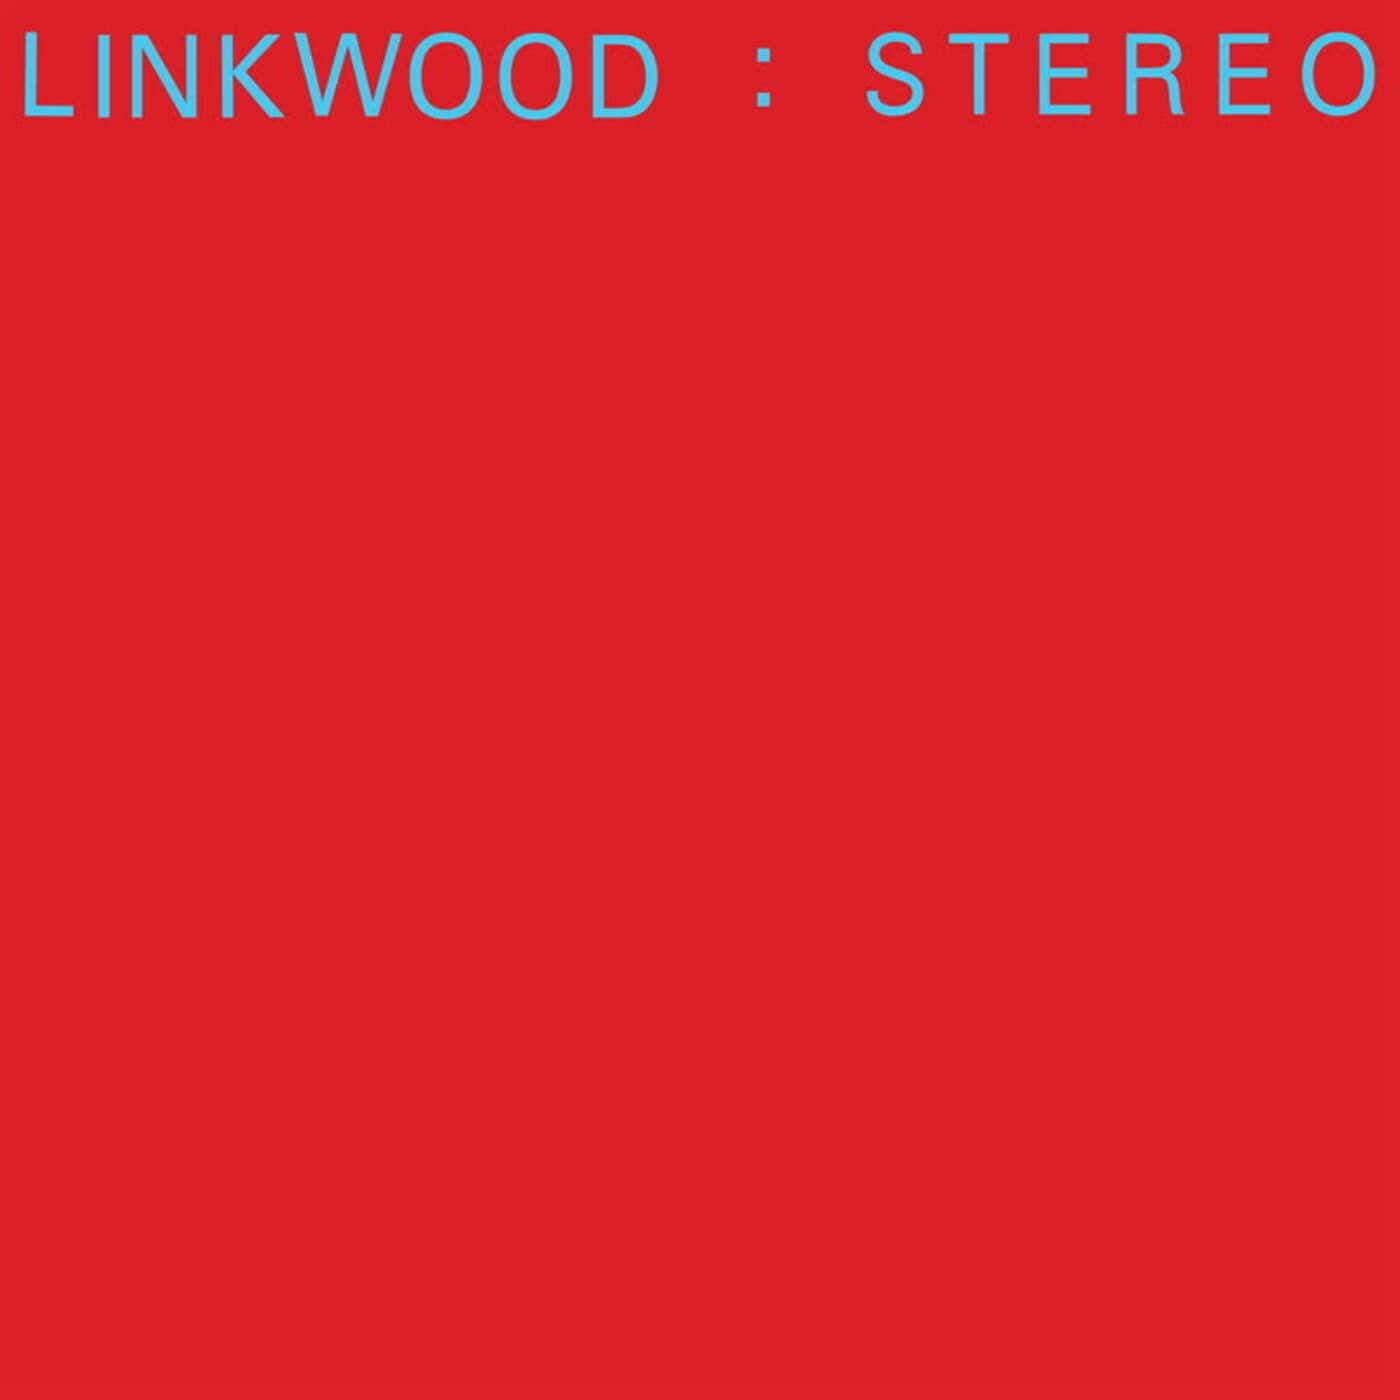 Download Linkwood - Stereo on Electrobuzz